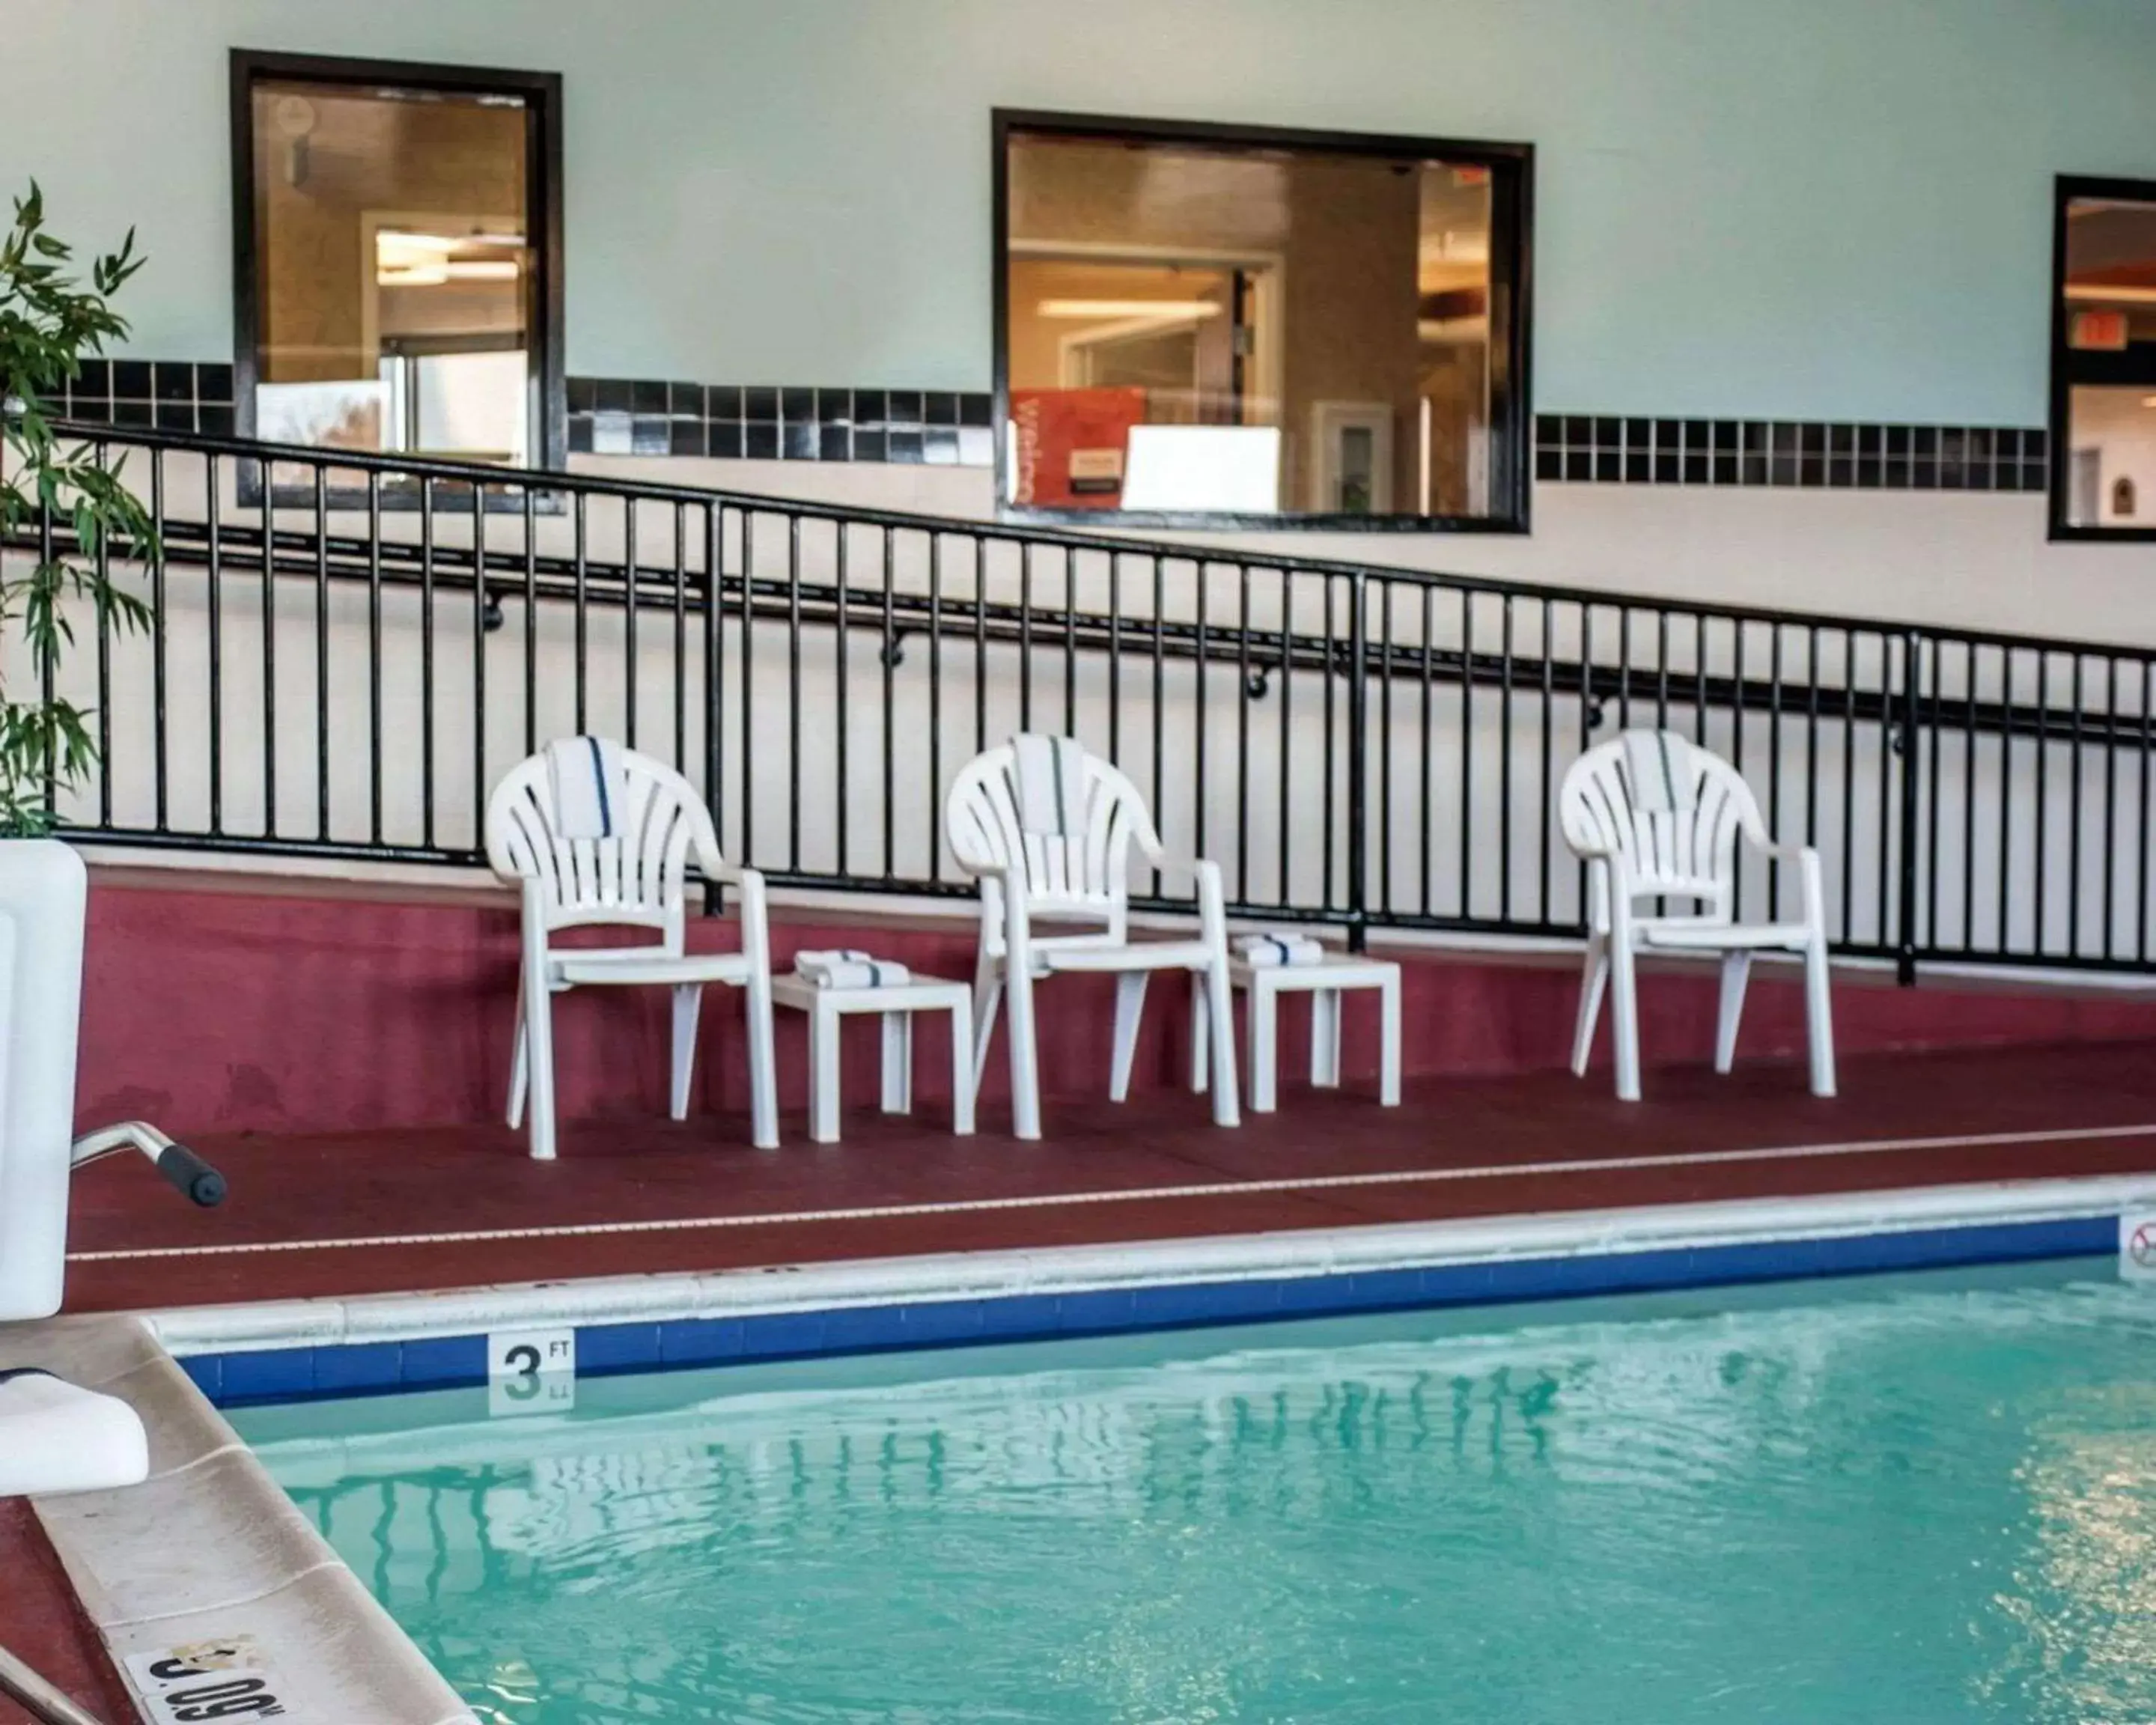 On site, Swimming Pool in Quality Inn & Suites near St Louis and I-255